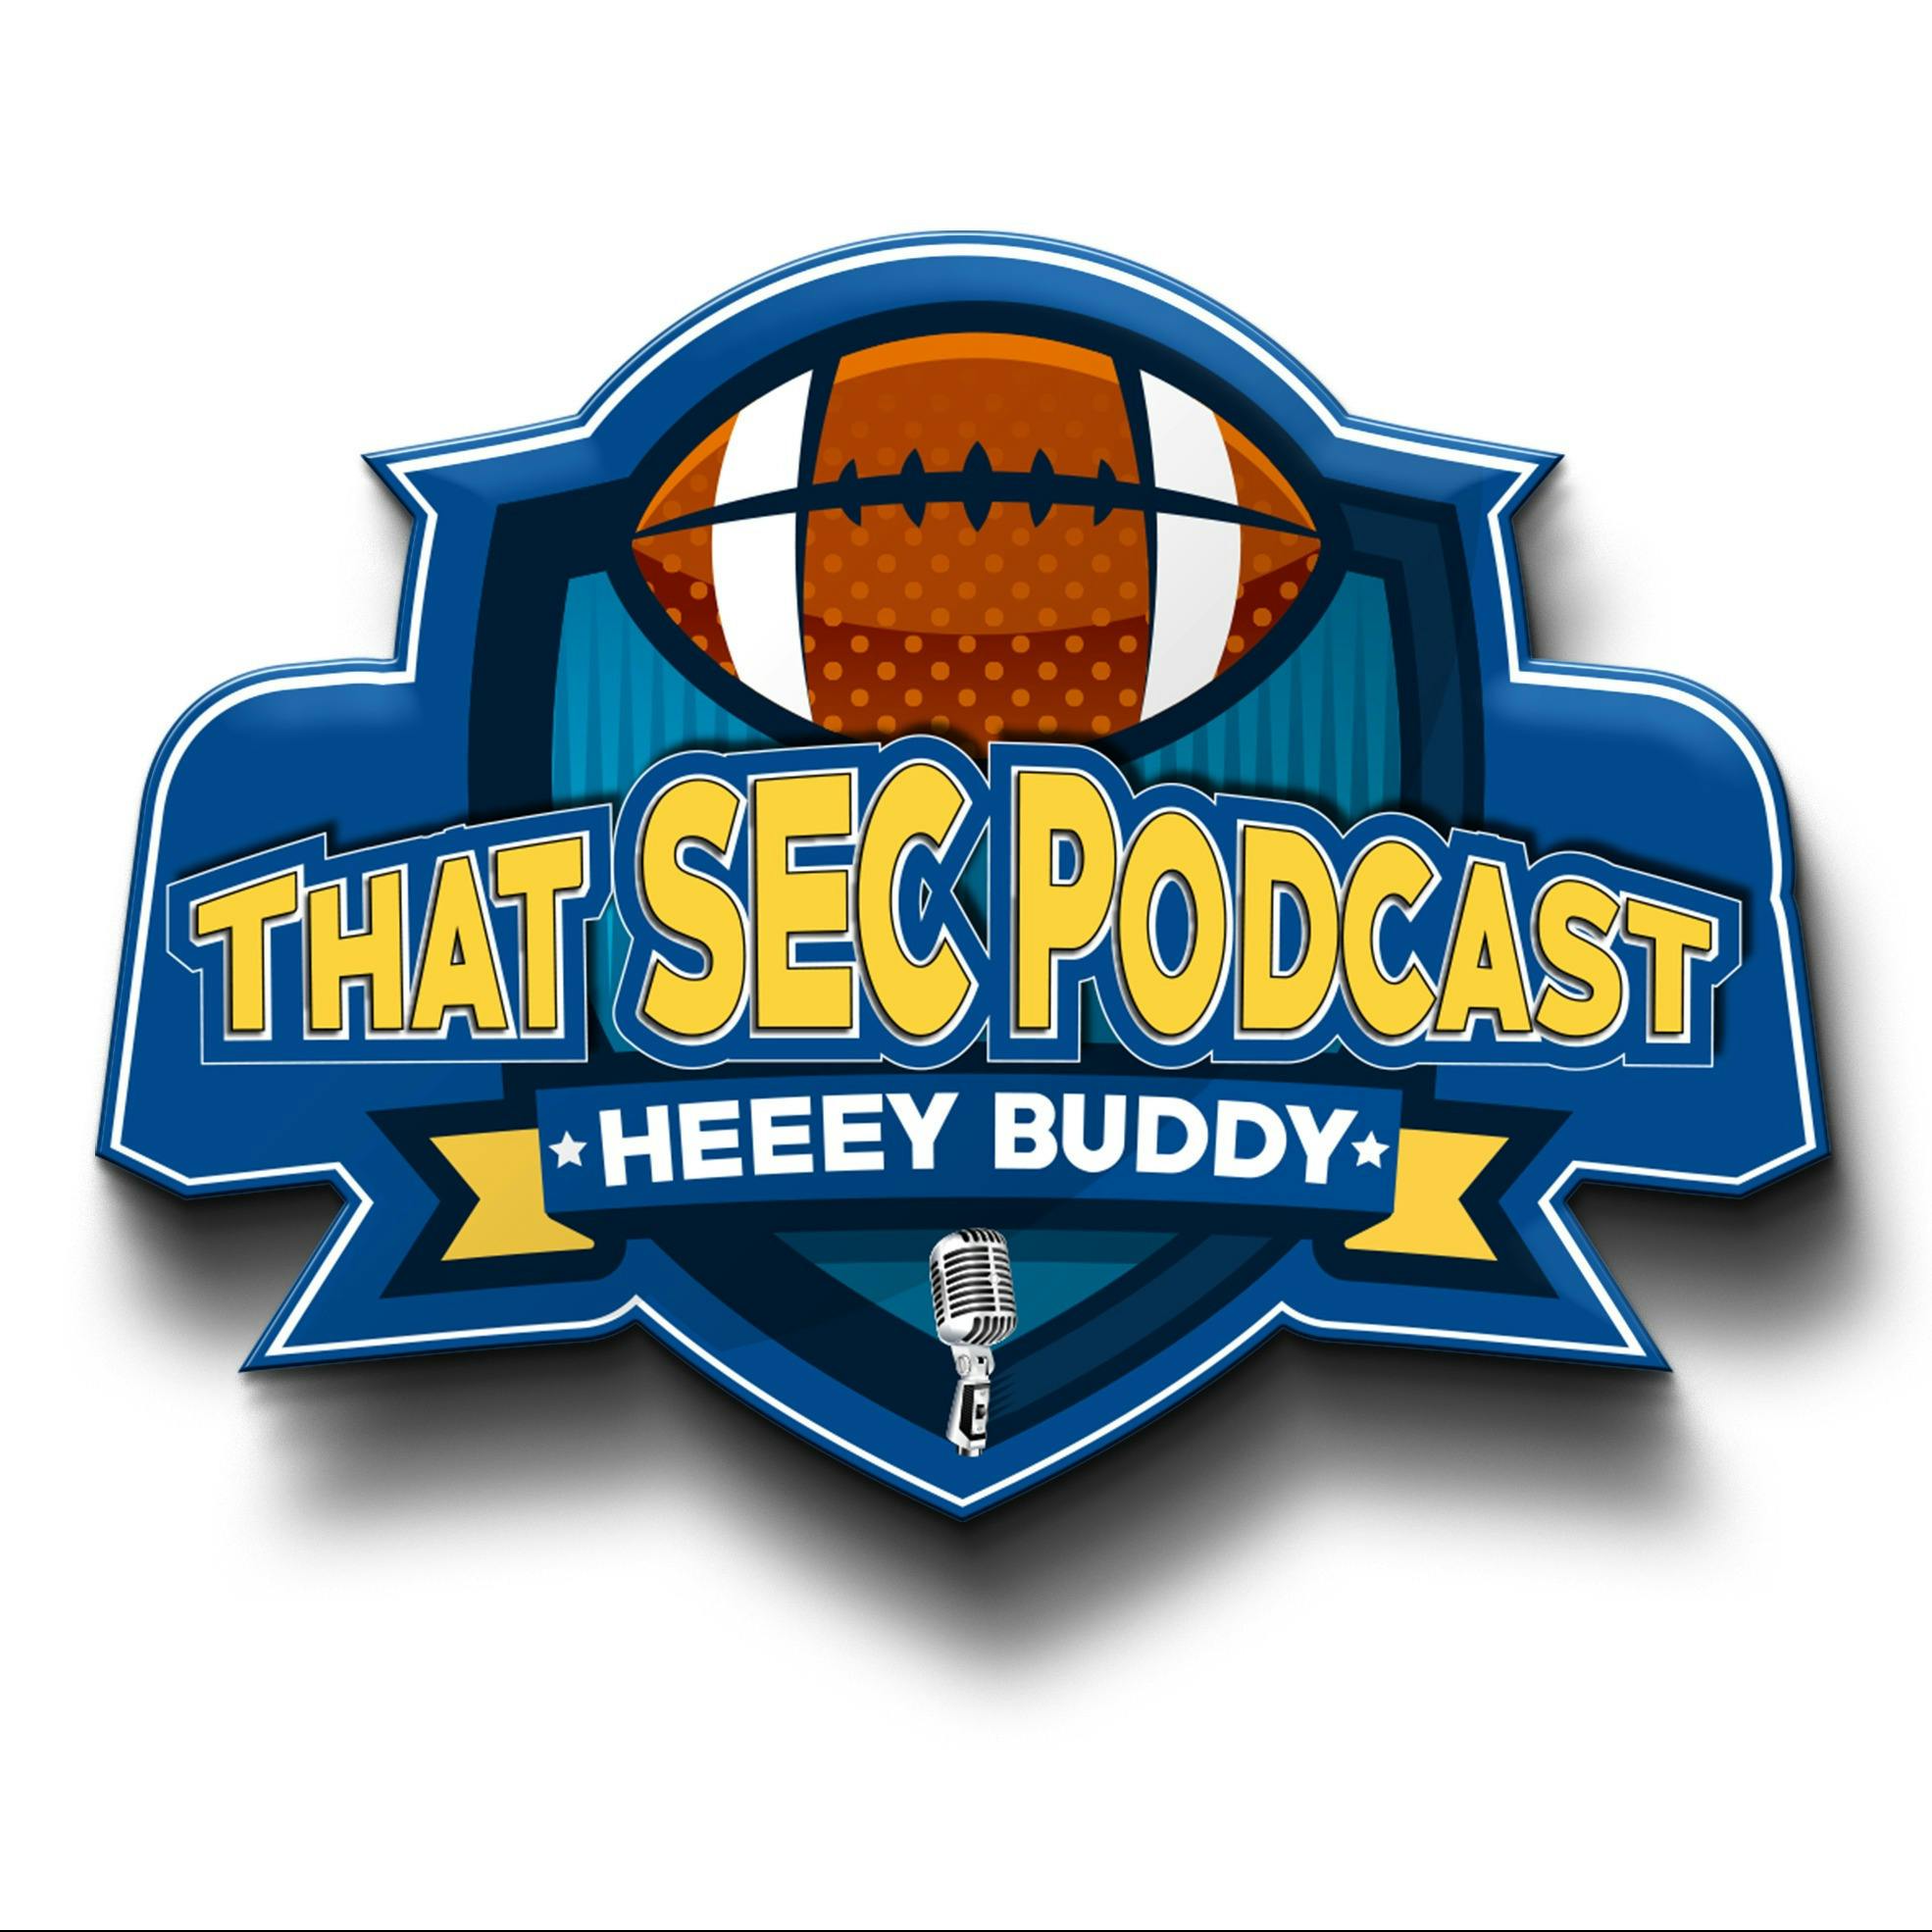 That SEC Football Podcast podcast show image